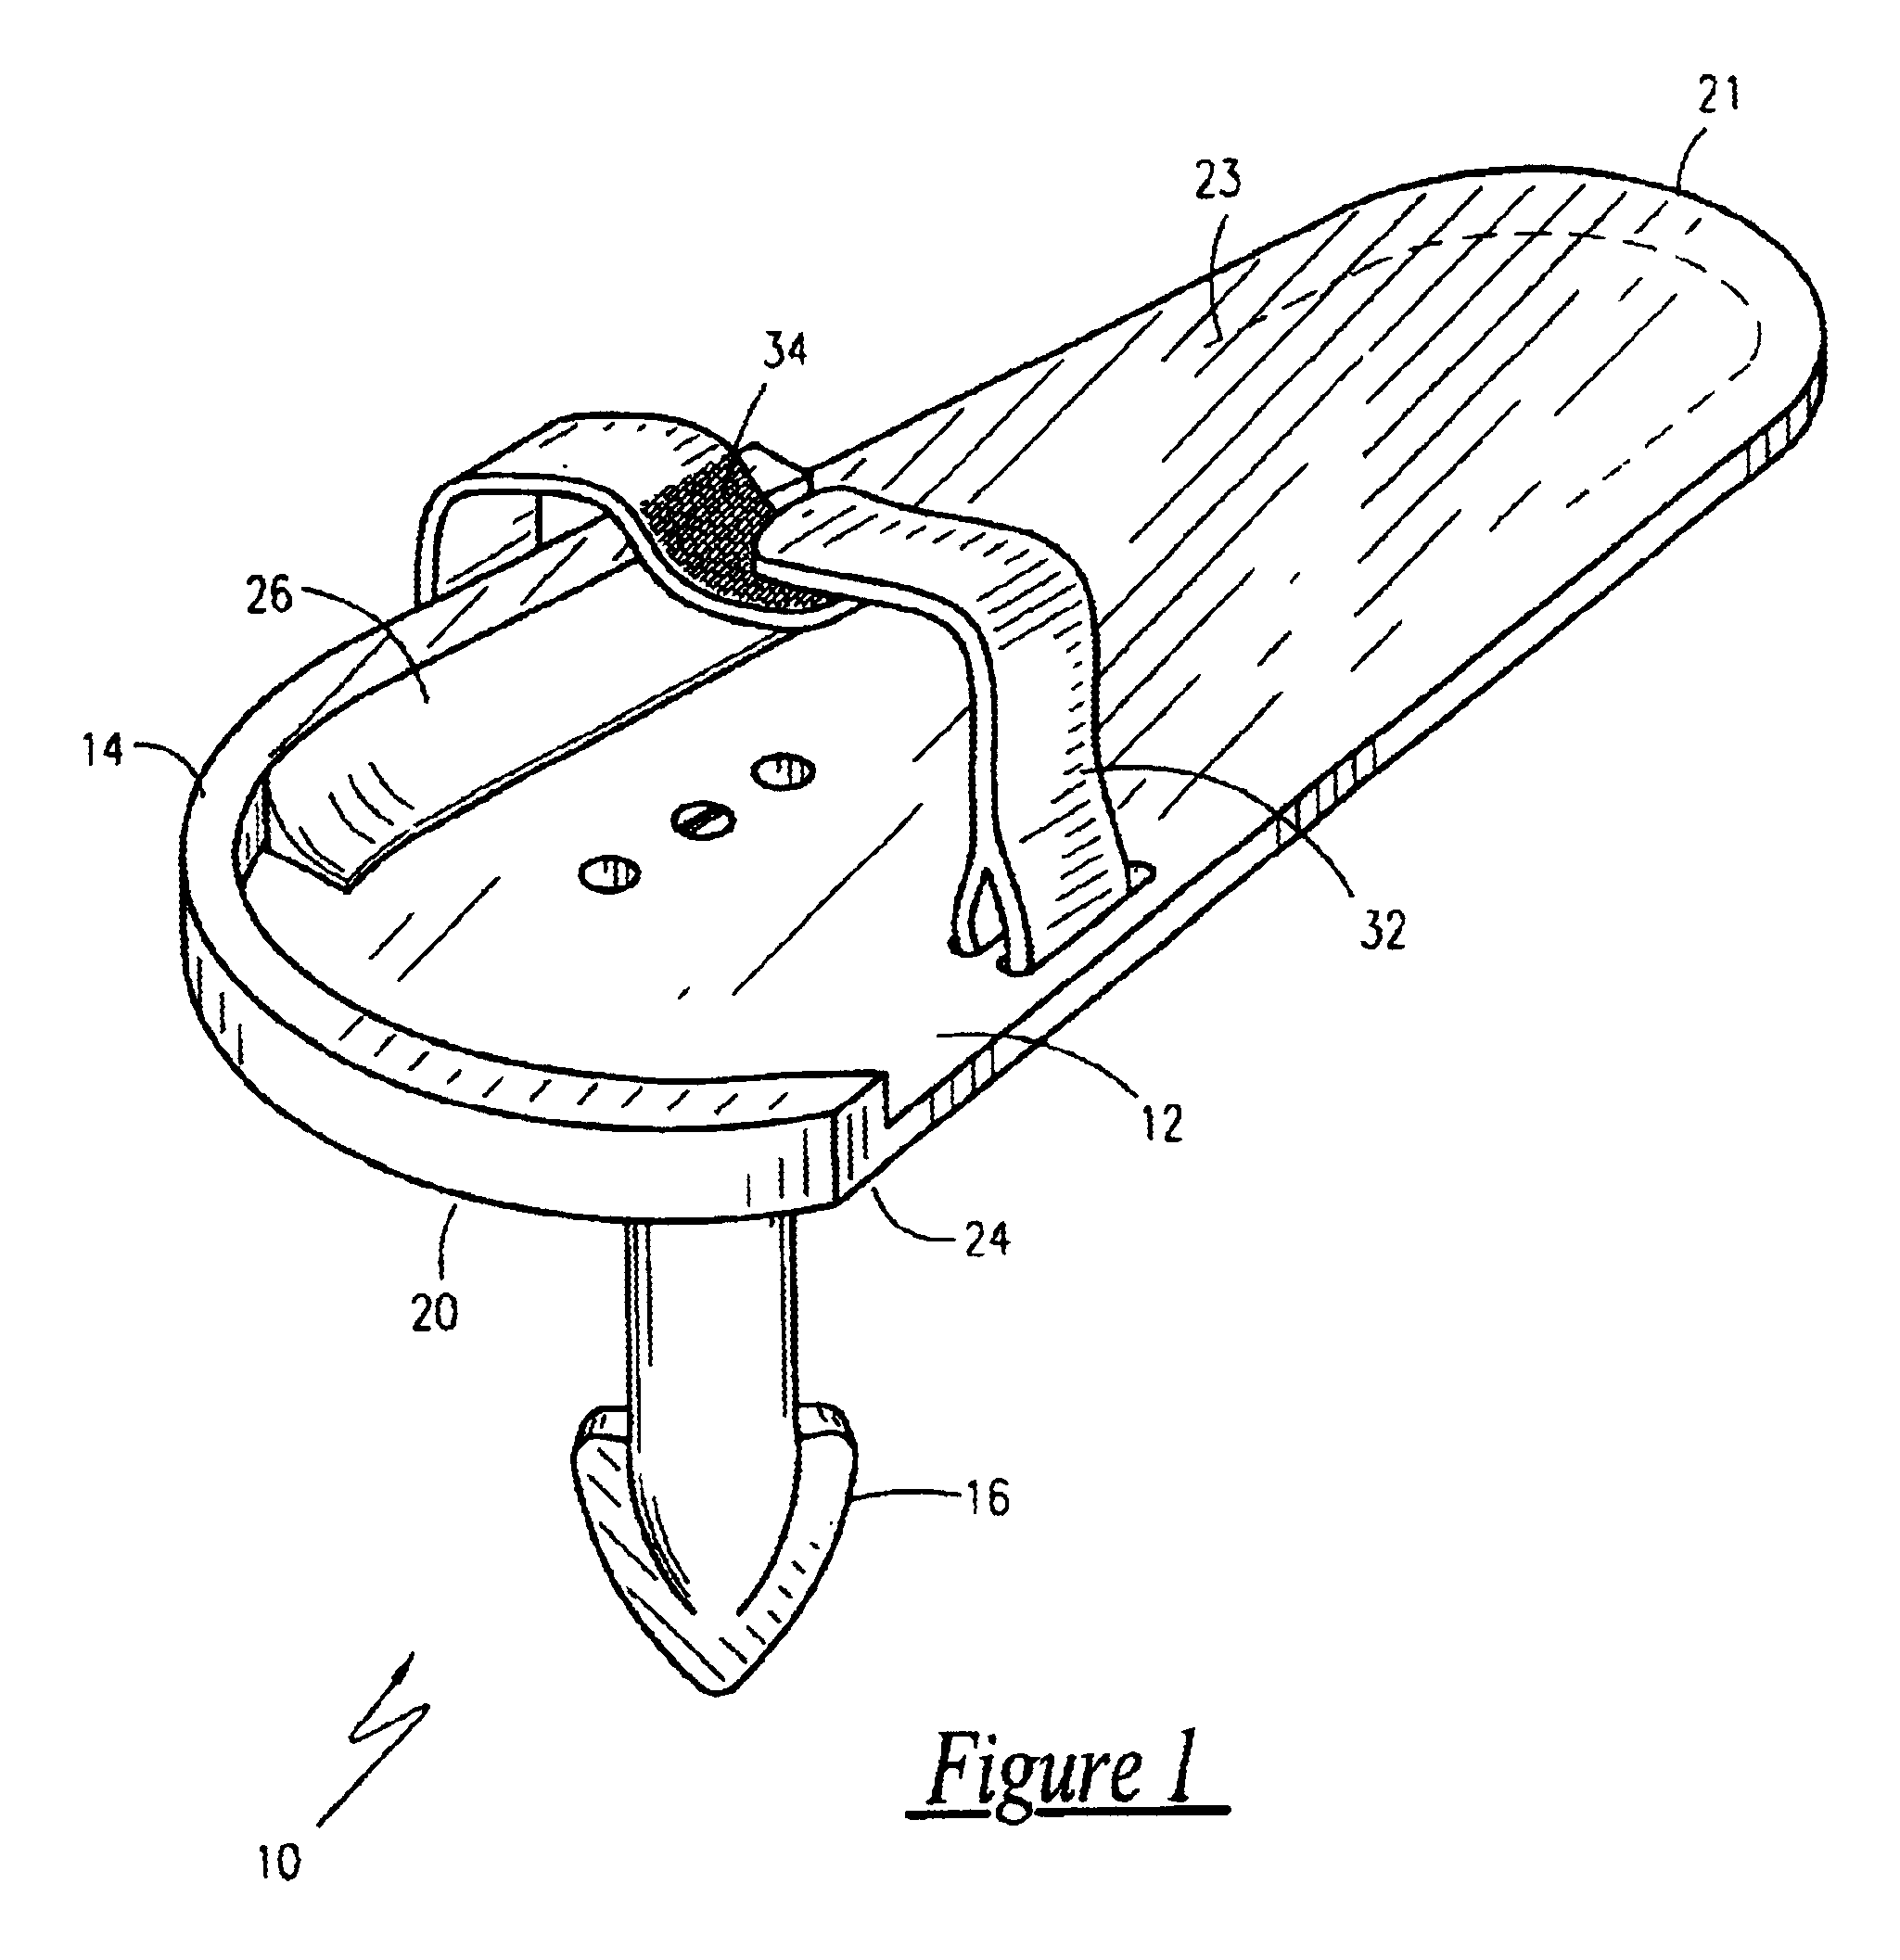 Sports stance and follow-through training apparatus